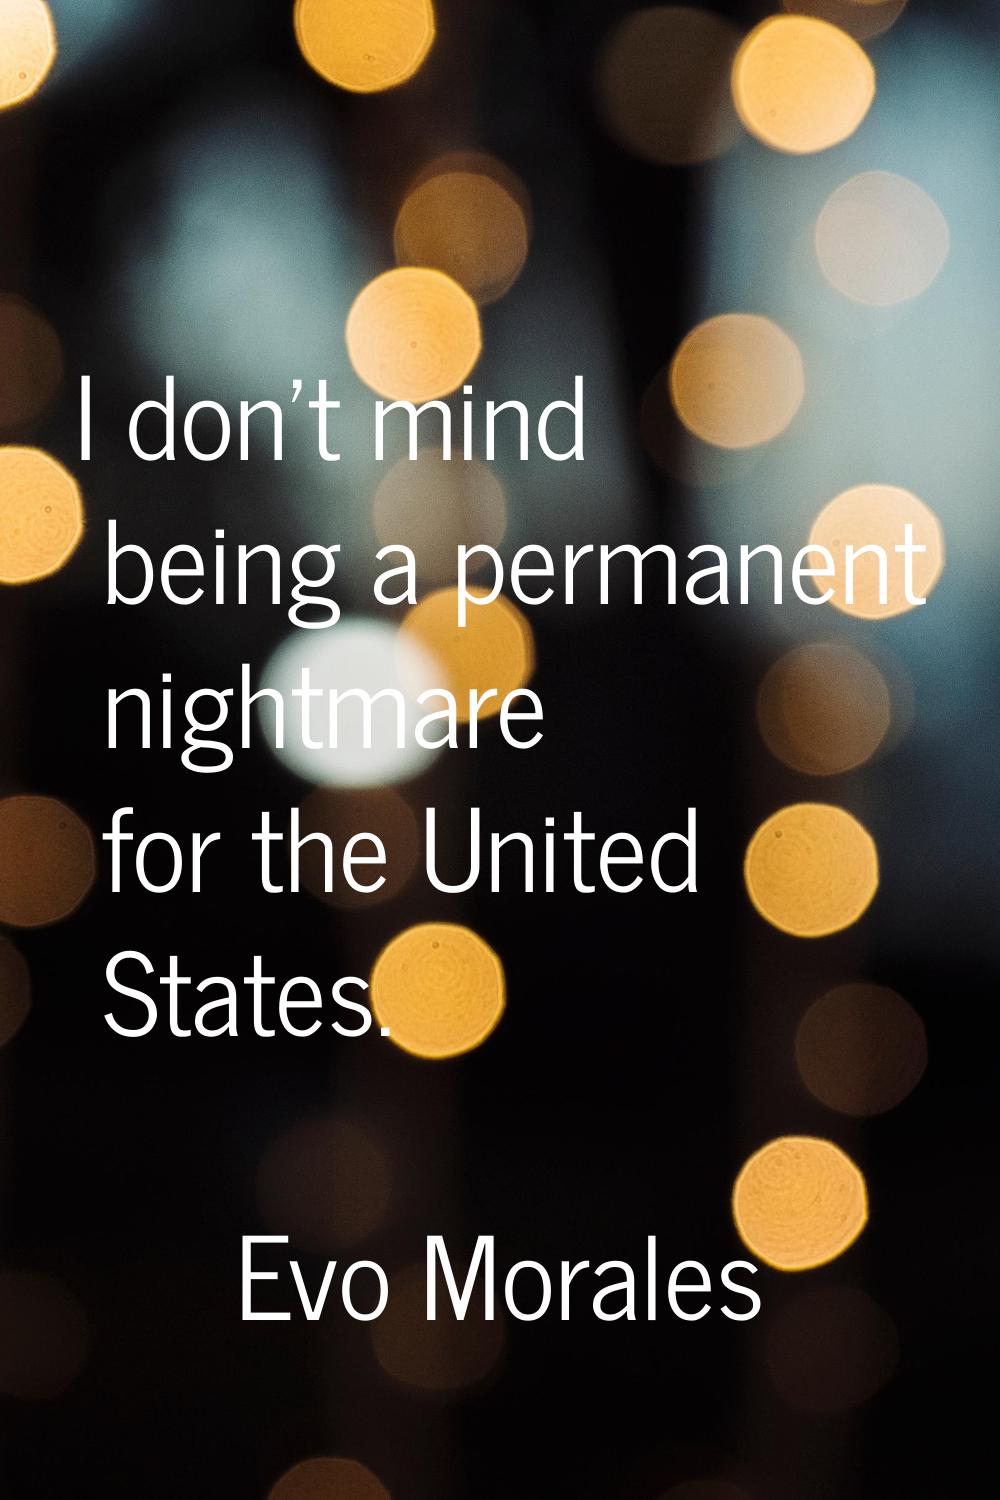 I don't mind being a permanent nightmare for the United States.